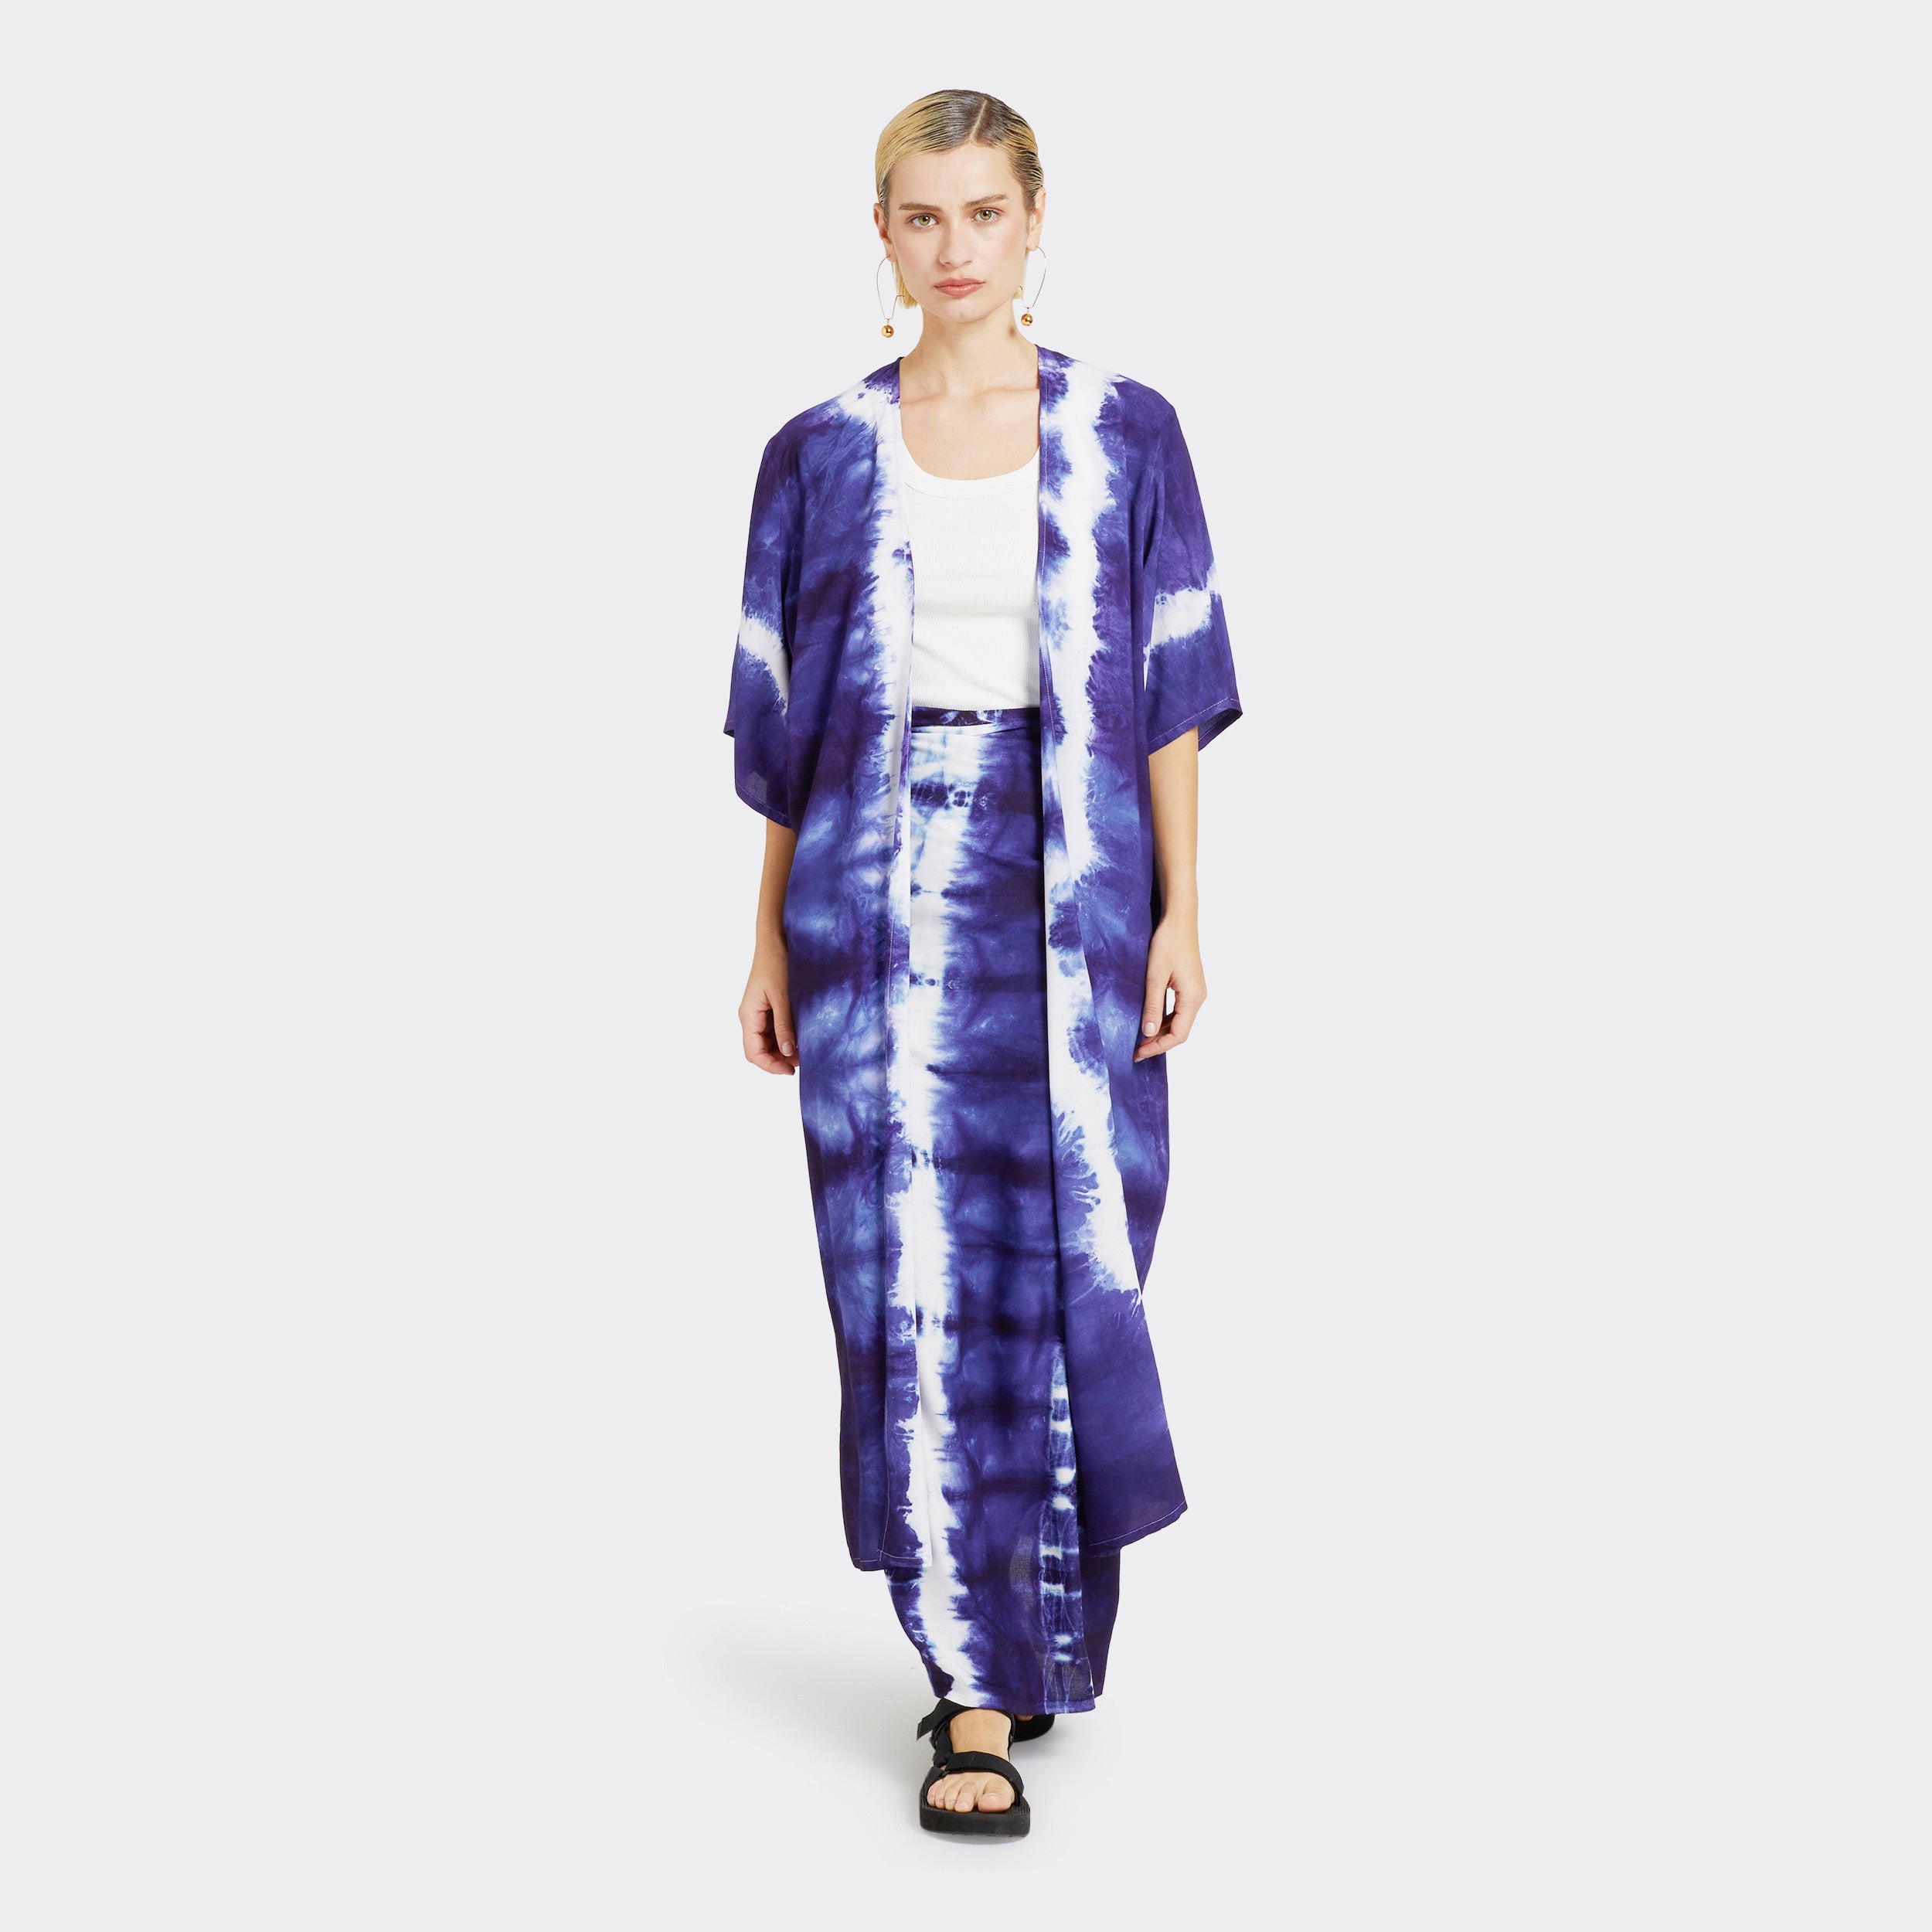 Model wears a Kimono in Tie Dye Soft Blue with a white shirt underneath. Along with the Wrap Trousers in Tie Dye Soft Blue.